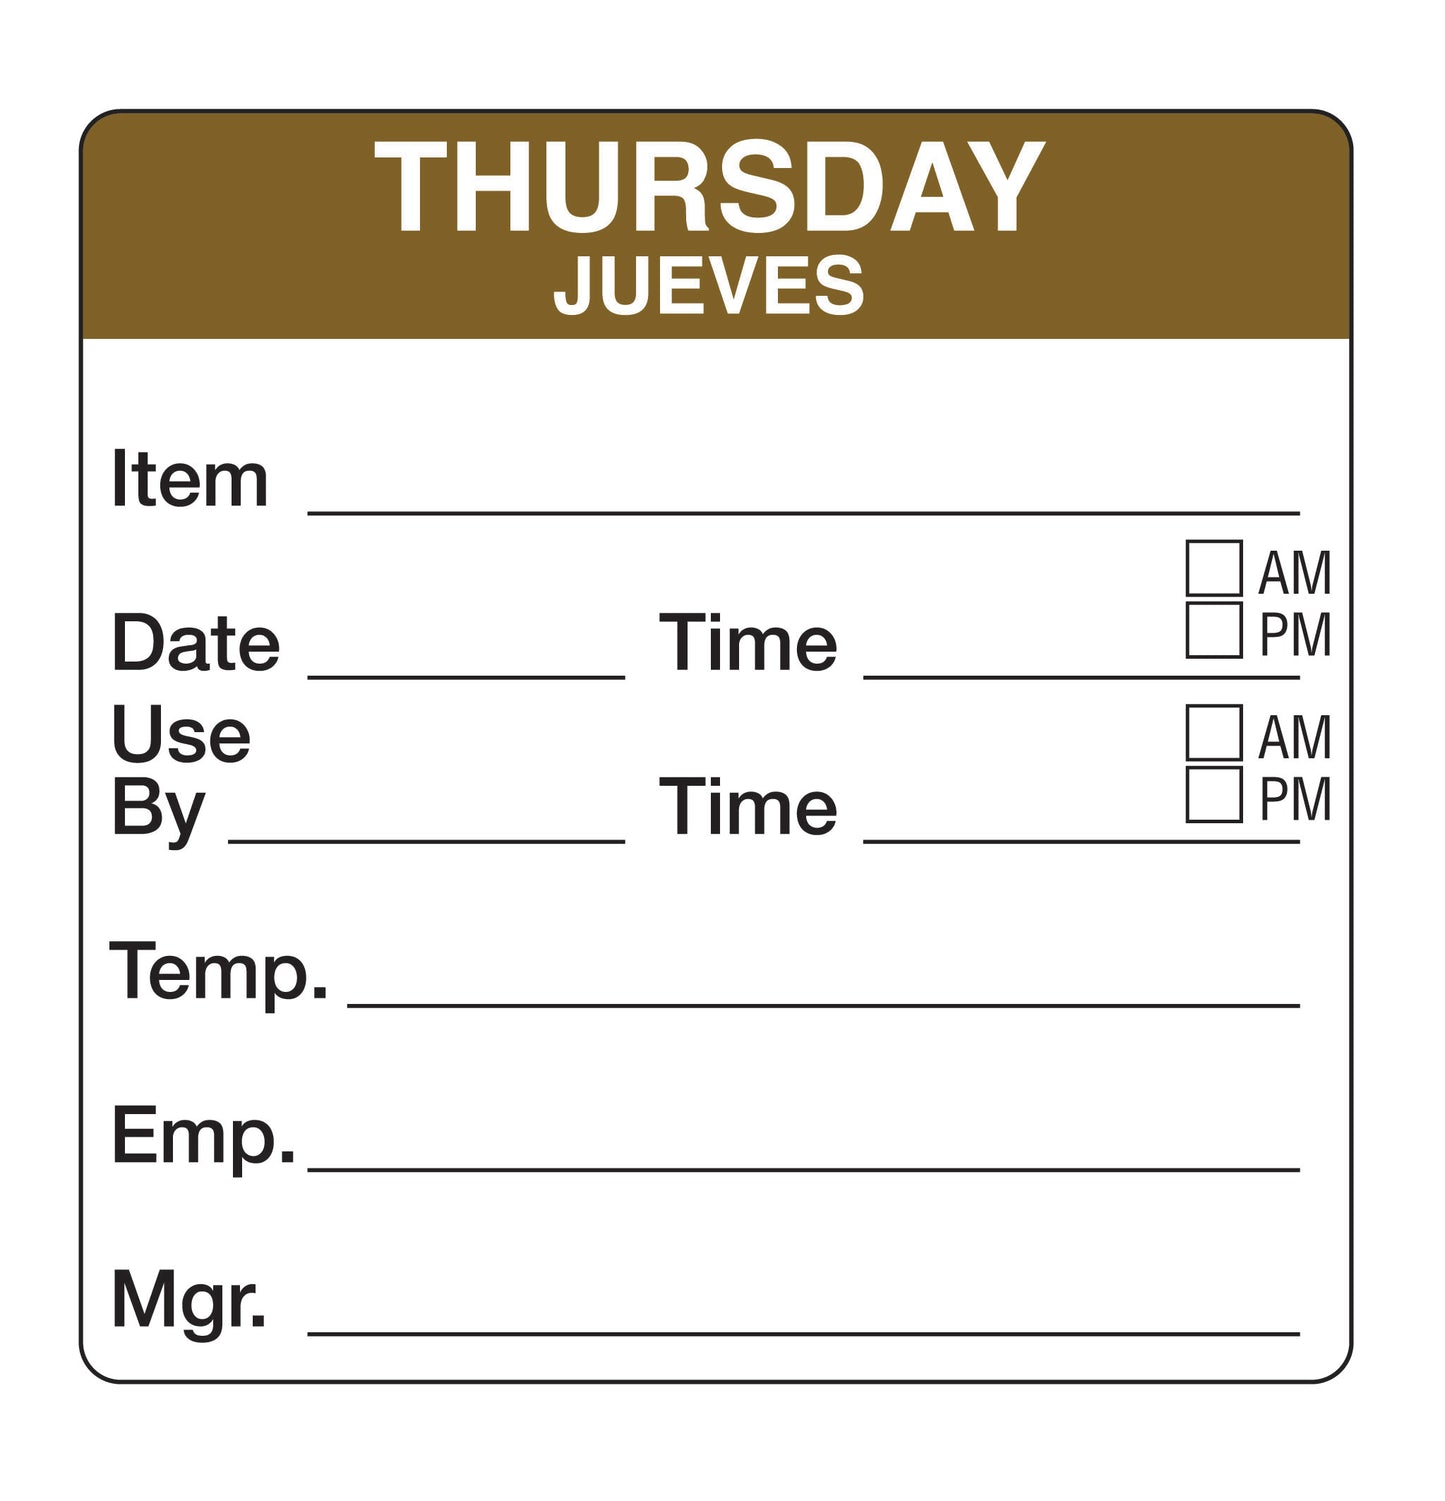 Thursday - Jueves 2" x 2" Removable Day of the Week Prep Date Label